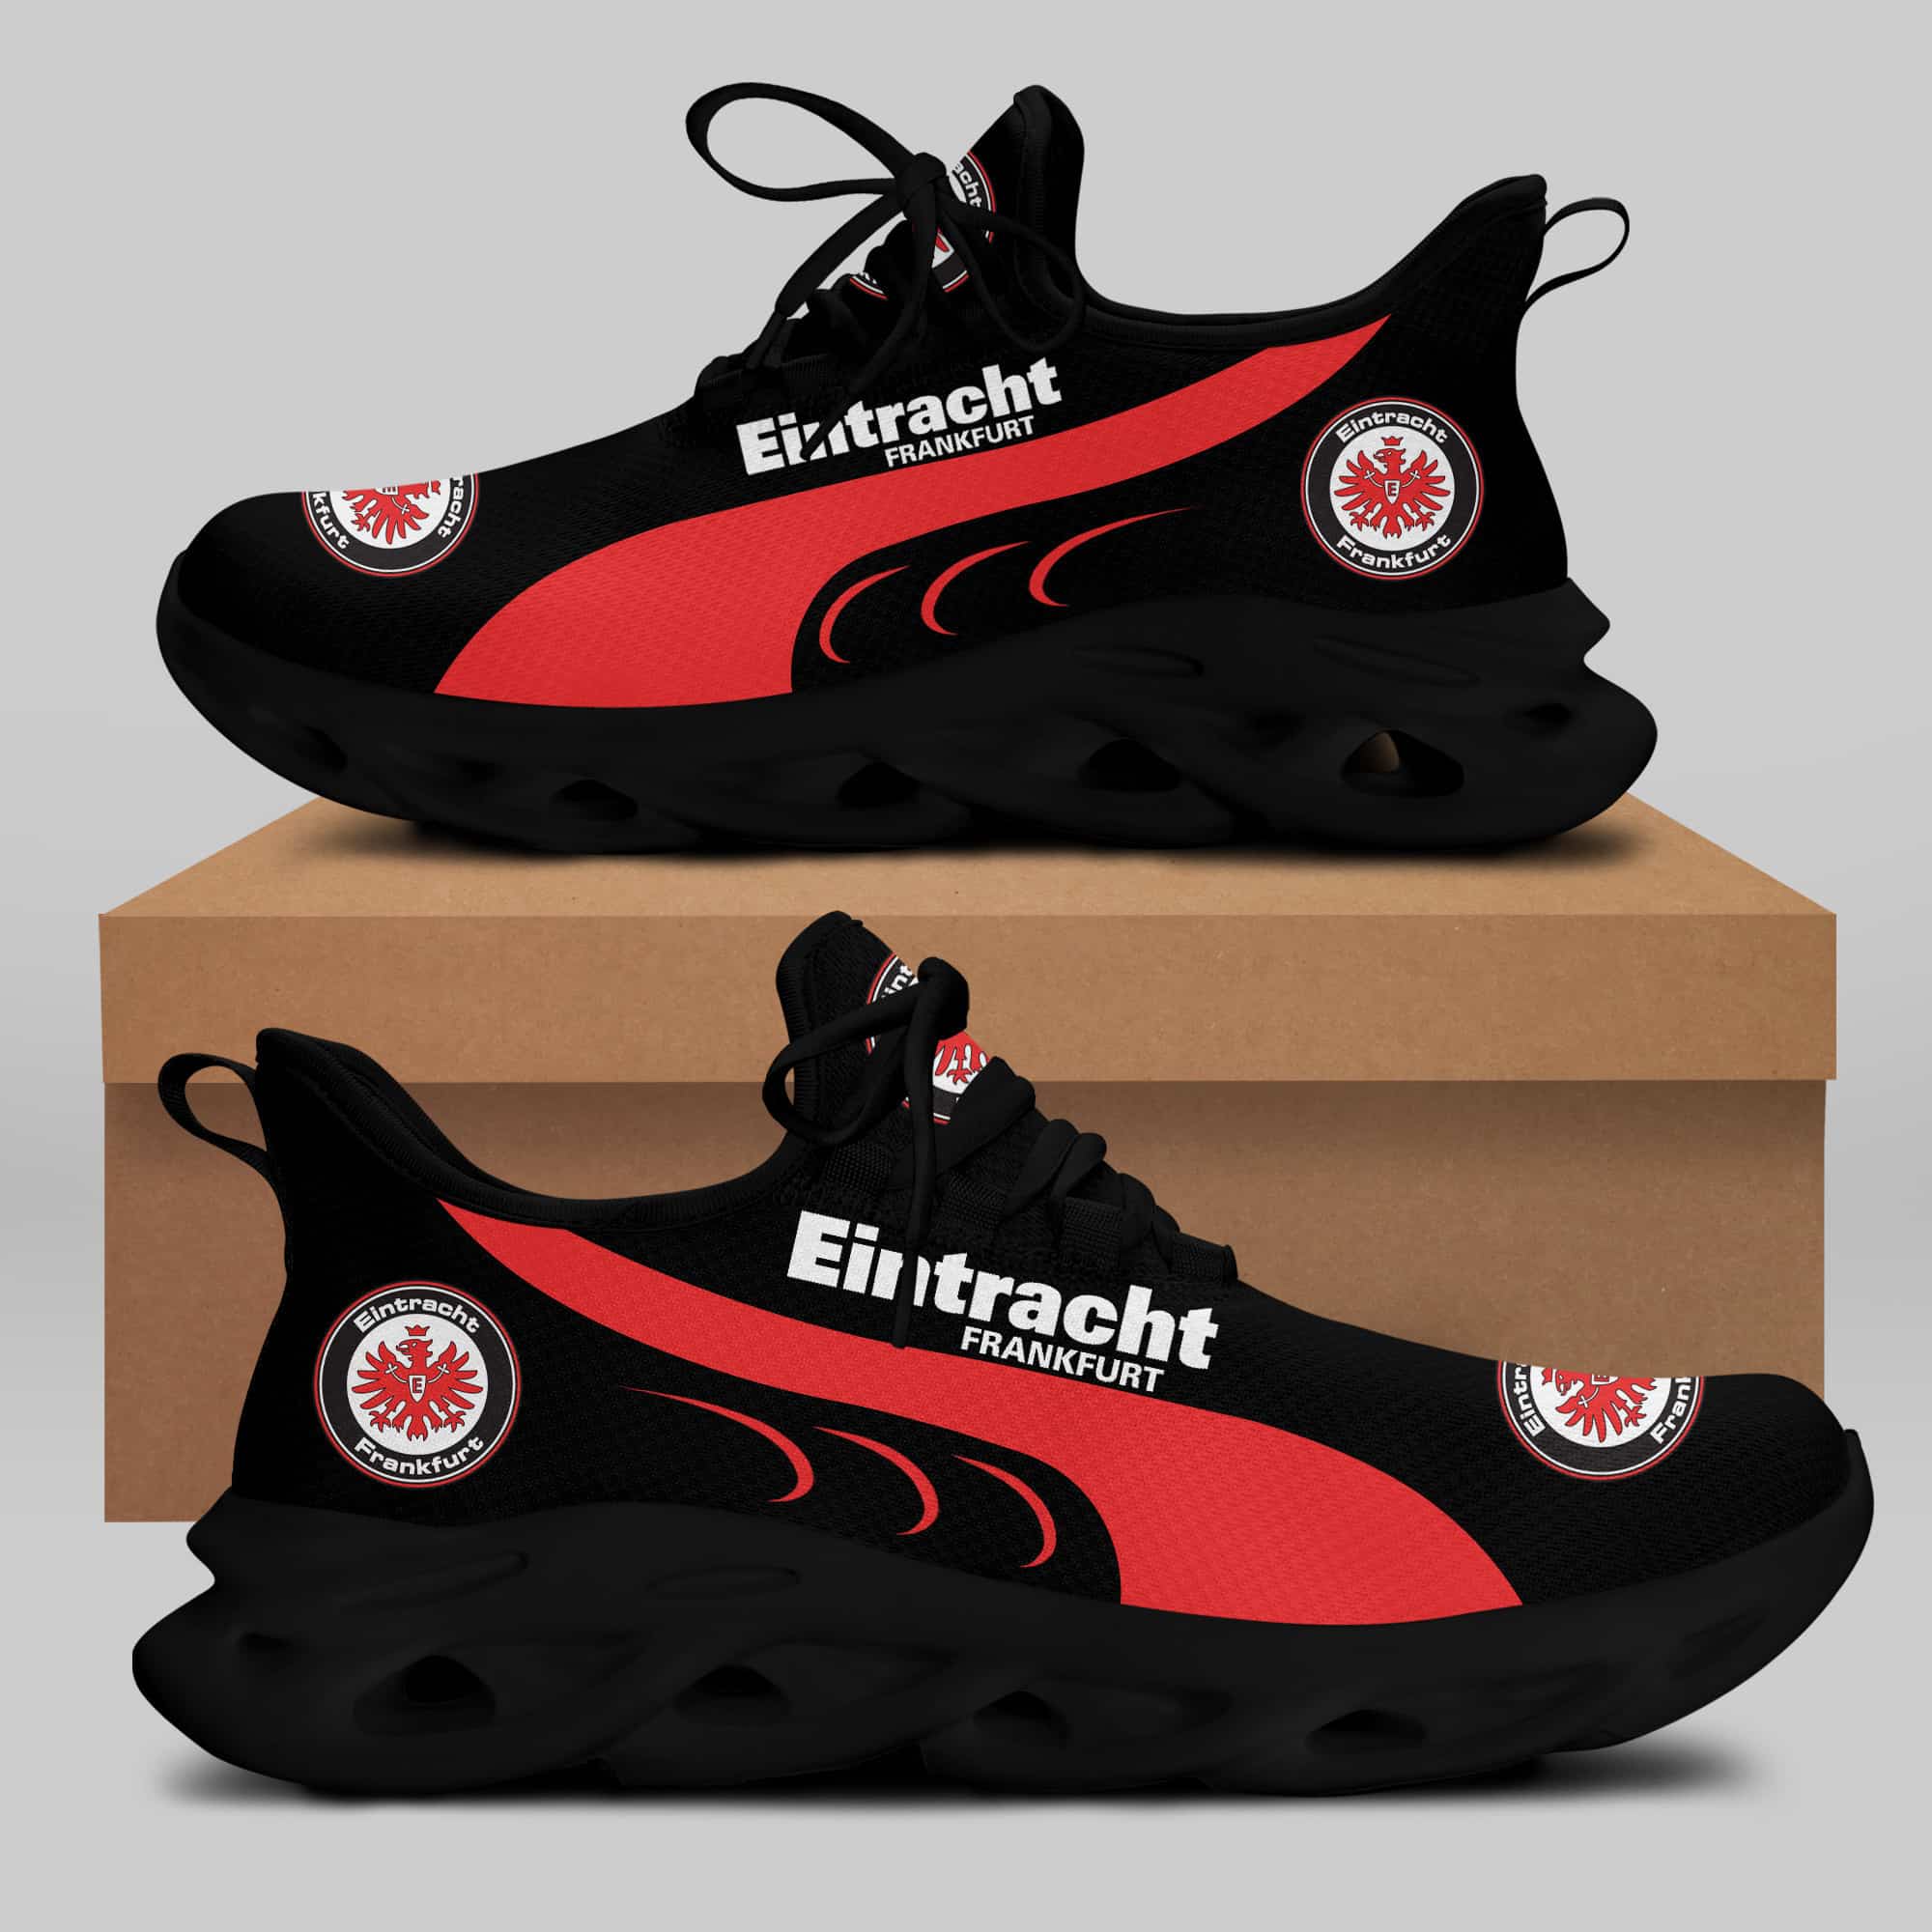 Eintracht Frankfurt Running Shoes Max Soul Shoes Sneakers Ver 2 1